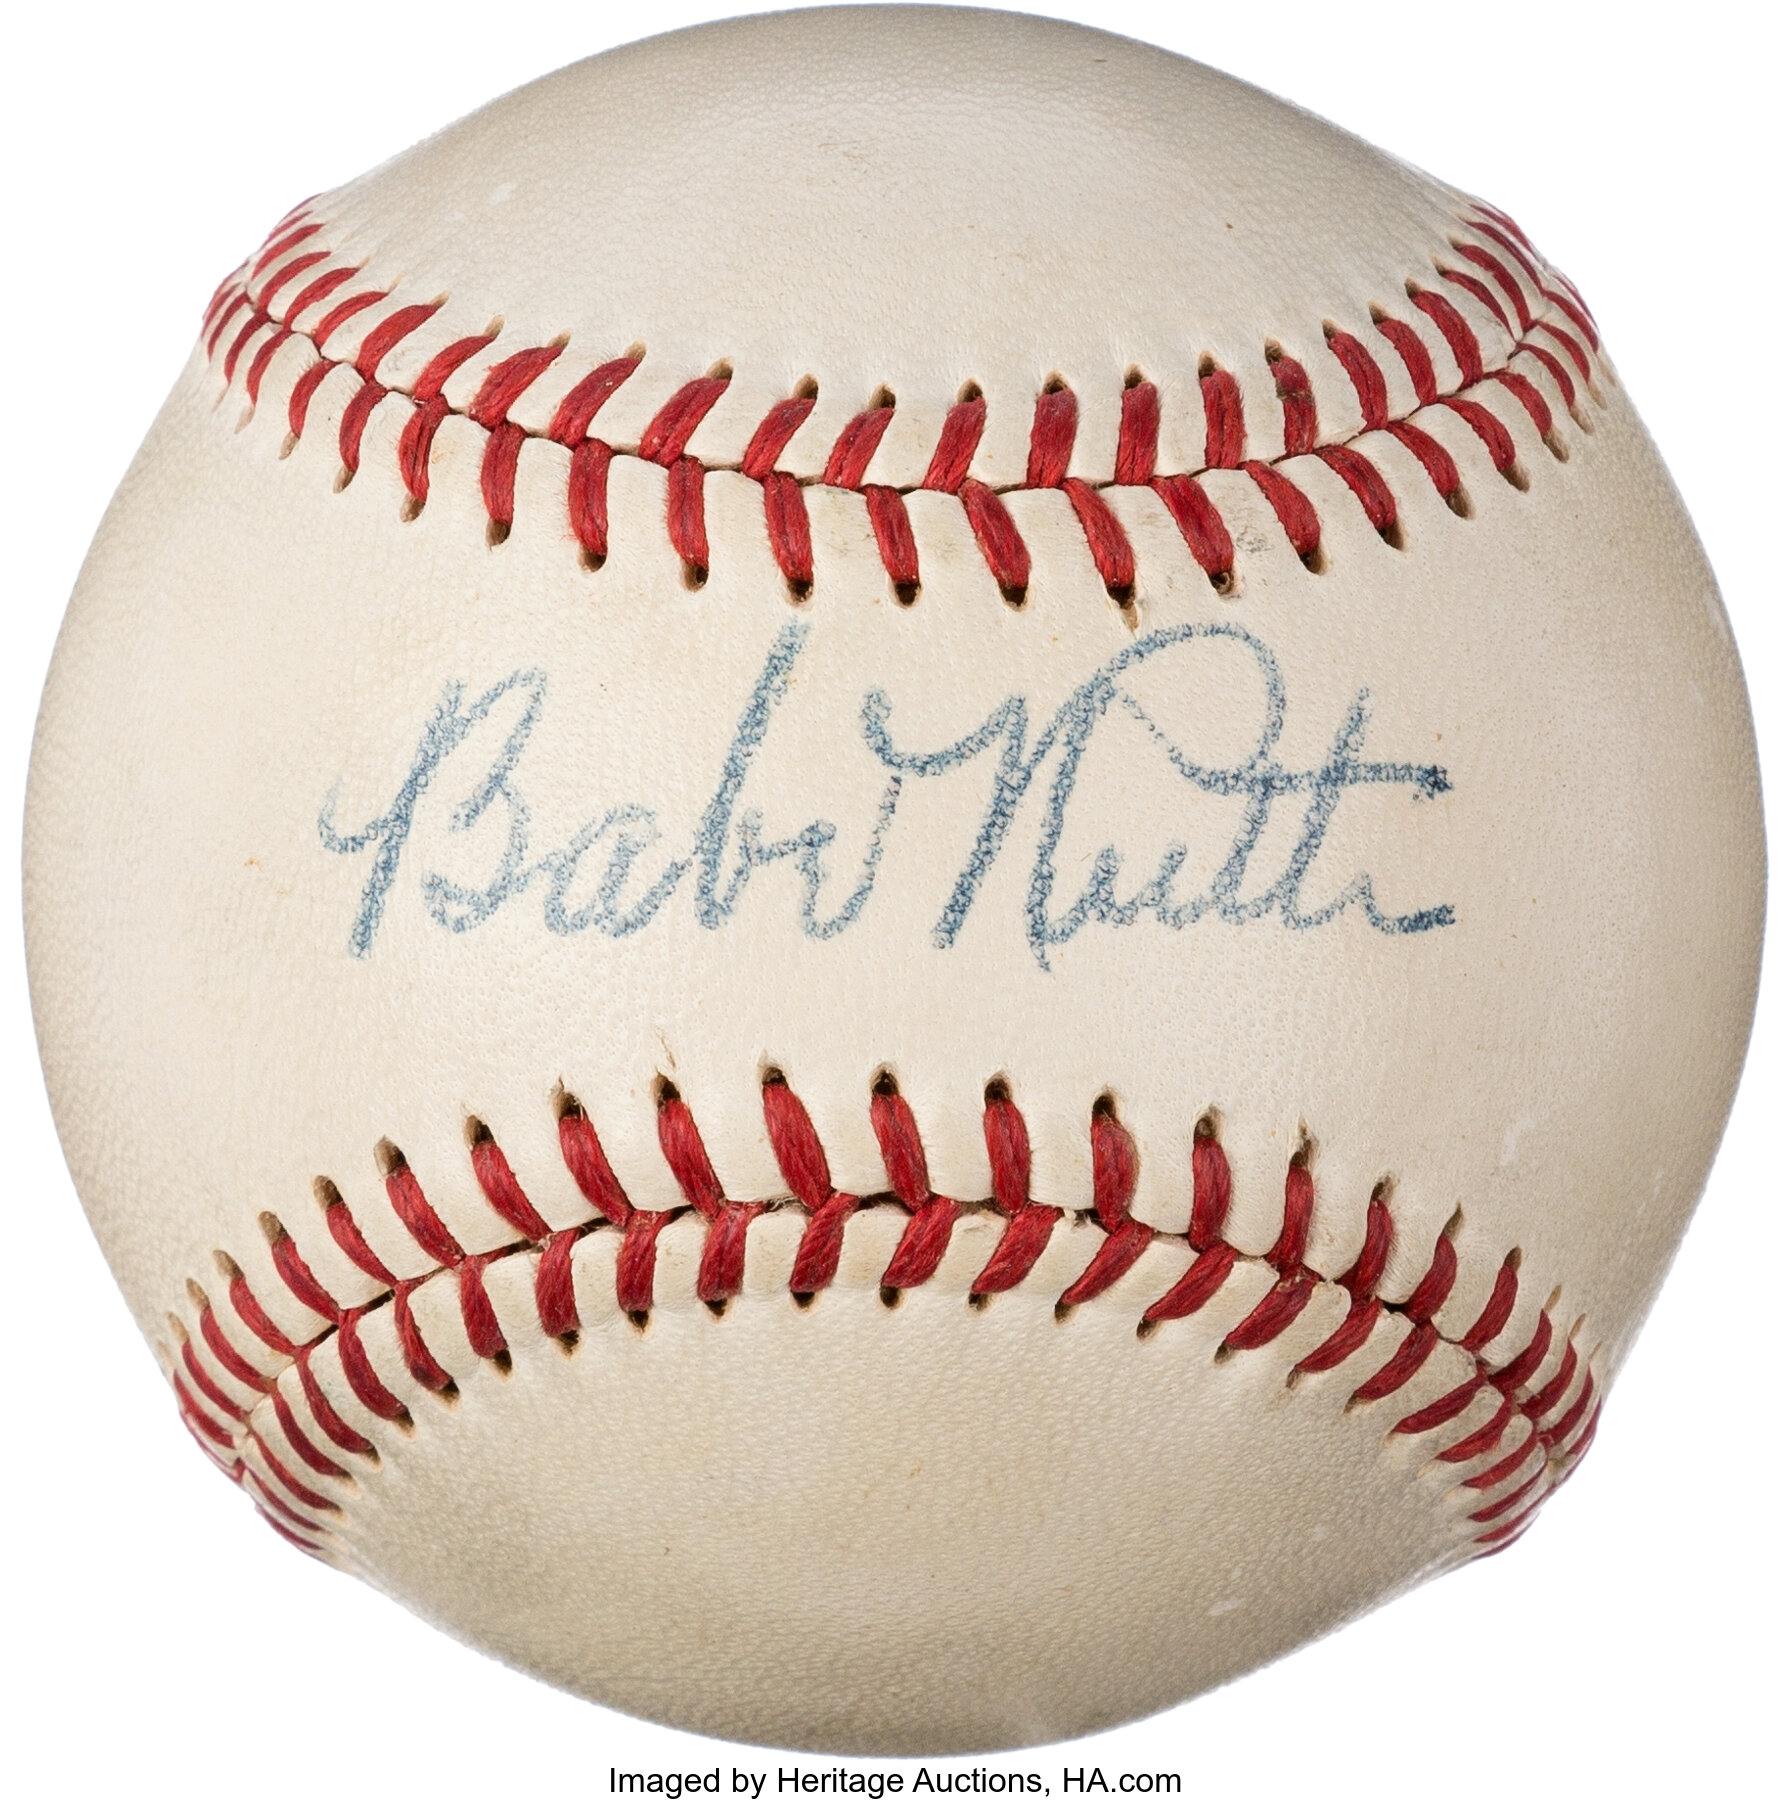 Magnificent Babe Ruth Single Signed 1948 American League Baseball